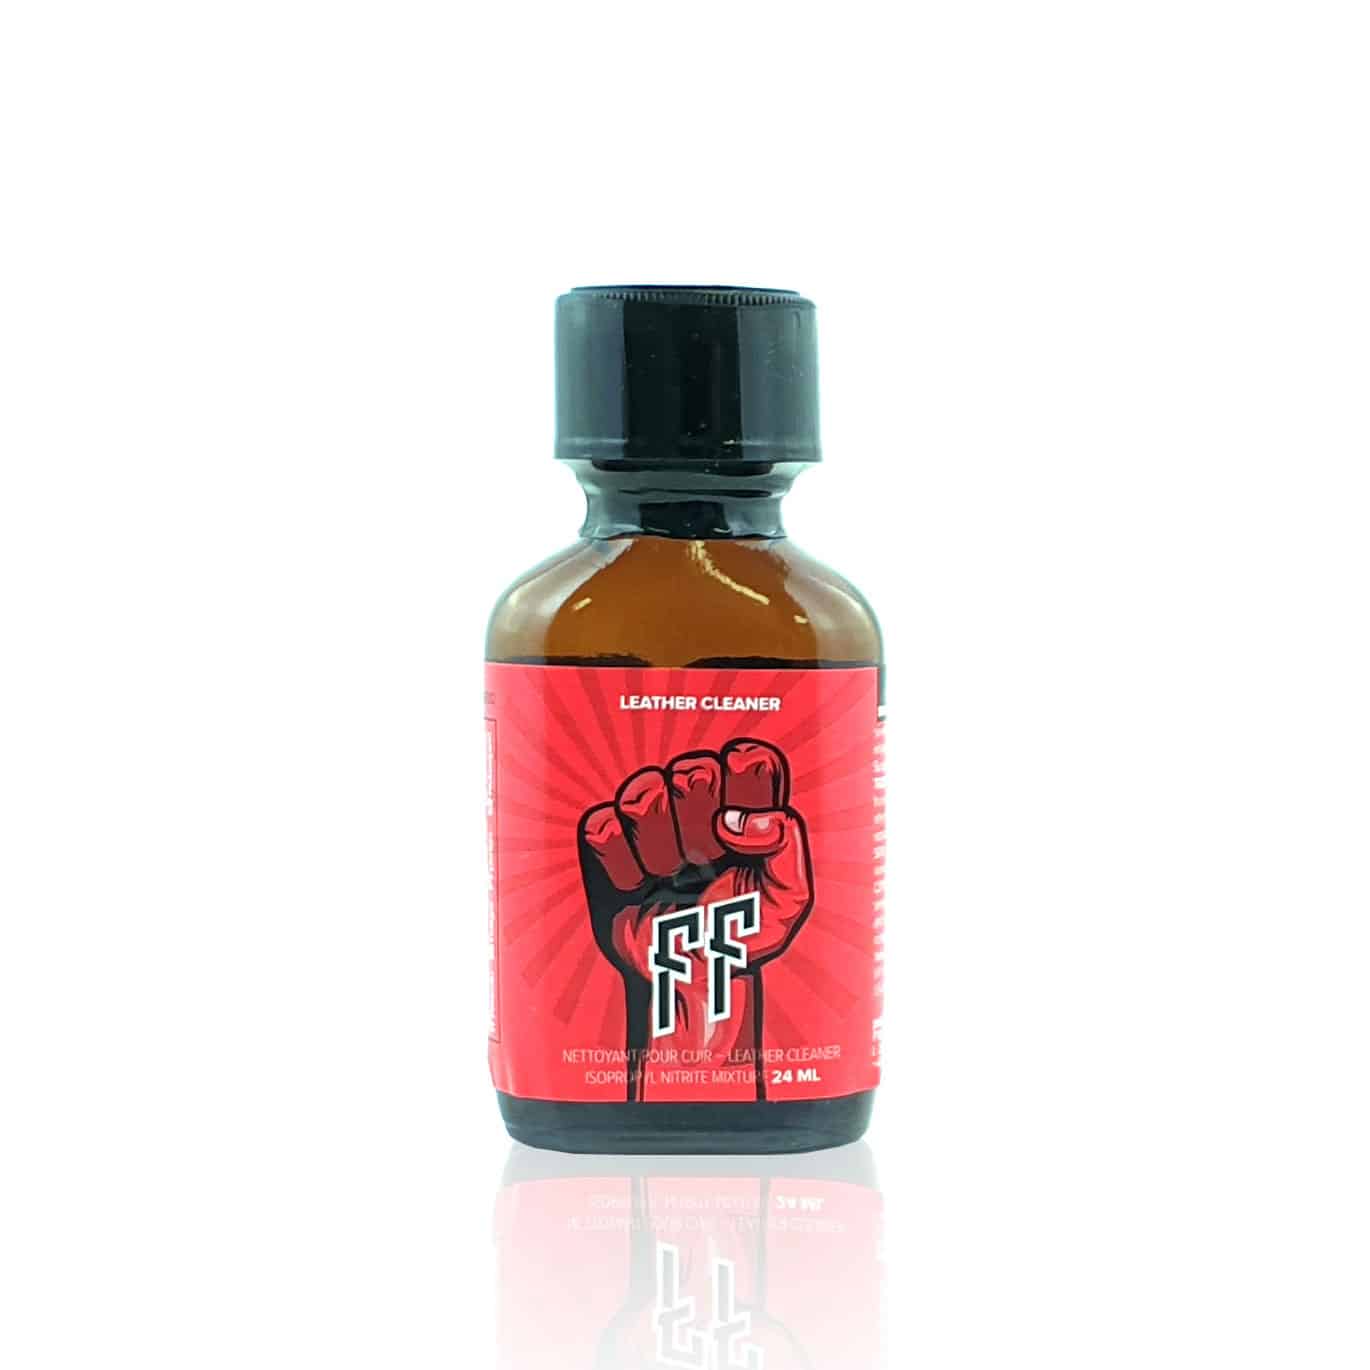 A bottle of leather cleaner with a bold black and red label featuring a clenched fist graphic, isolated on a reflective white background.